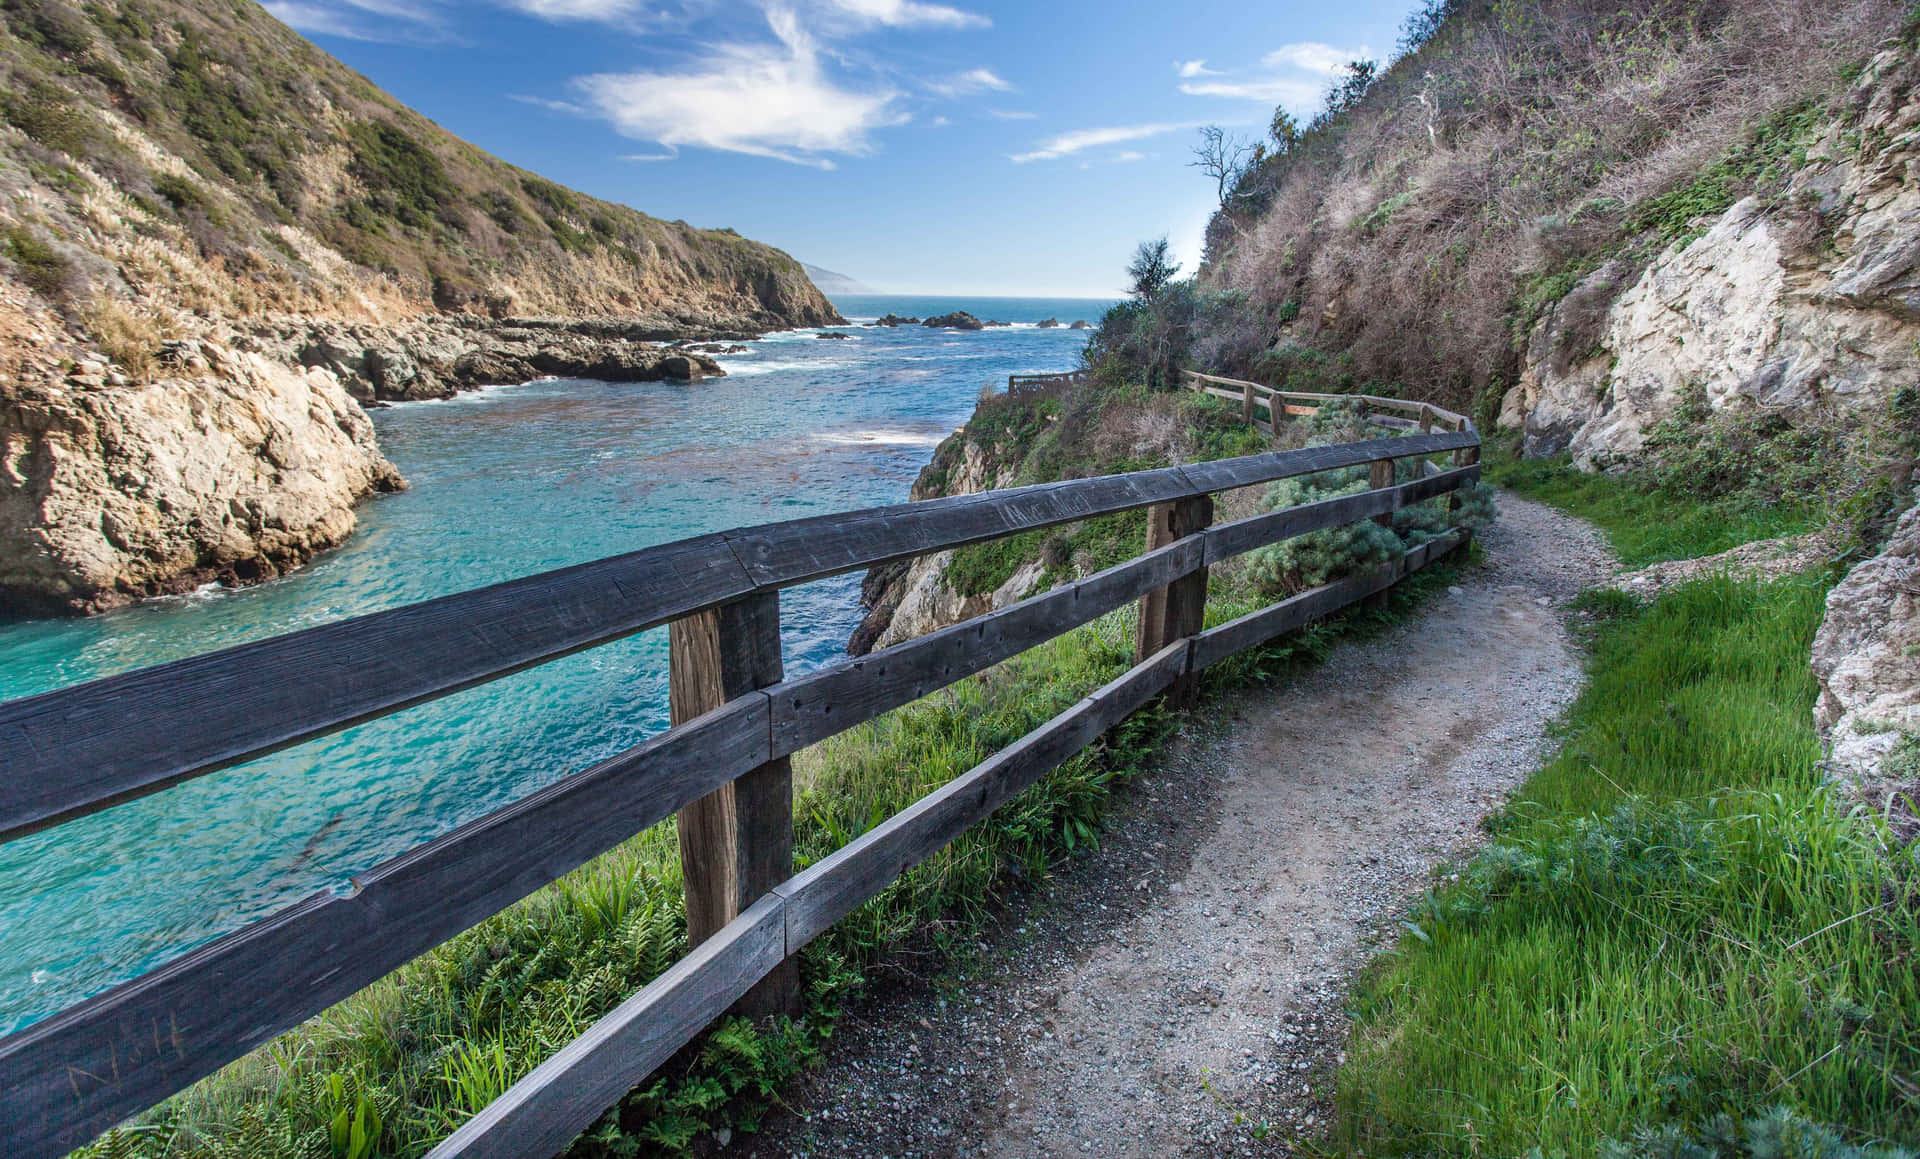 Take in the beauty of Big Sur, California